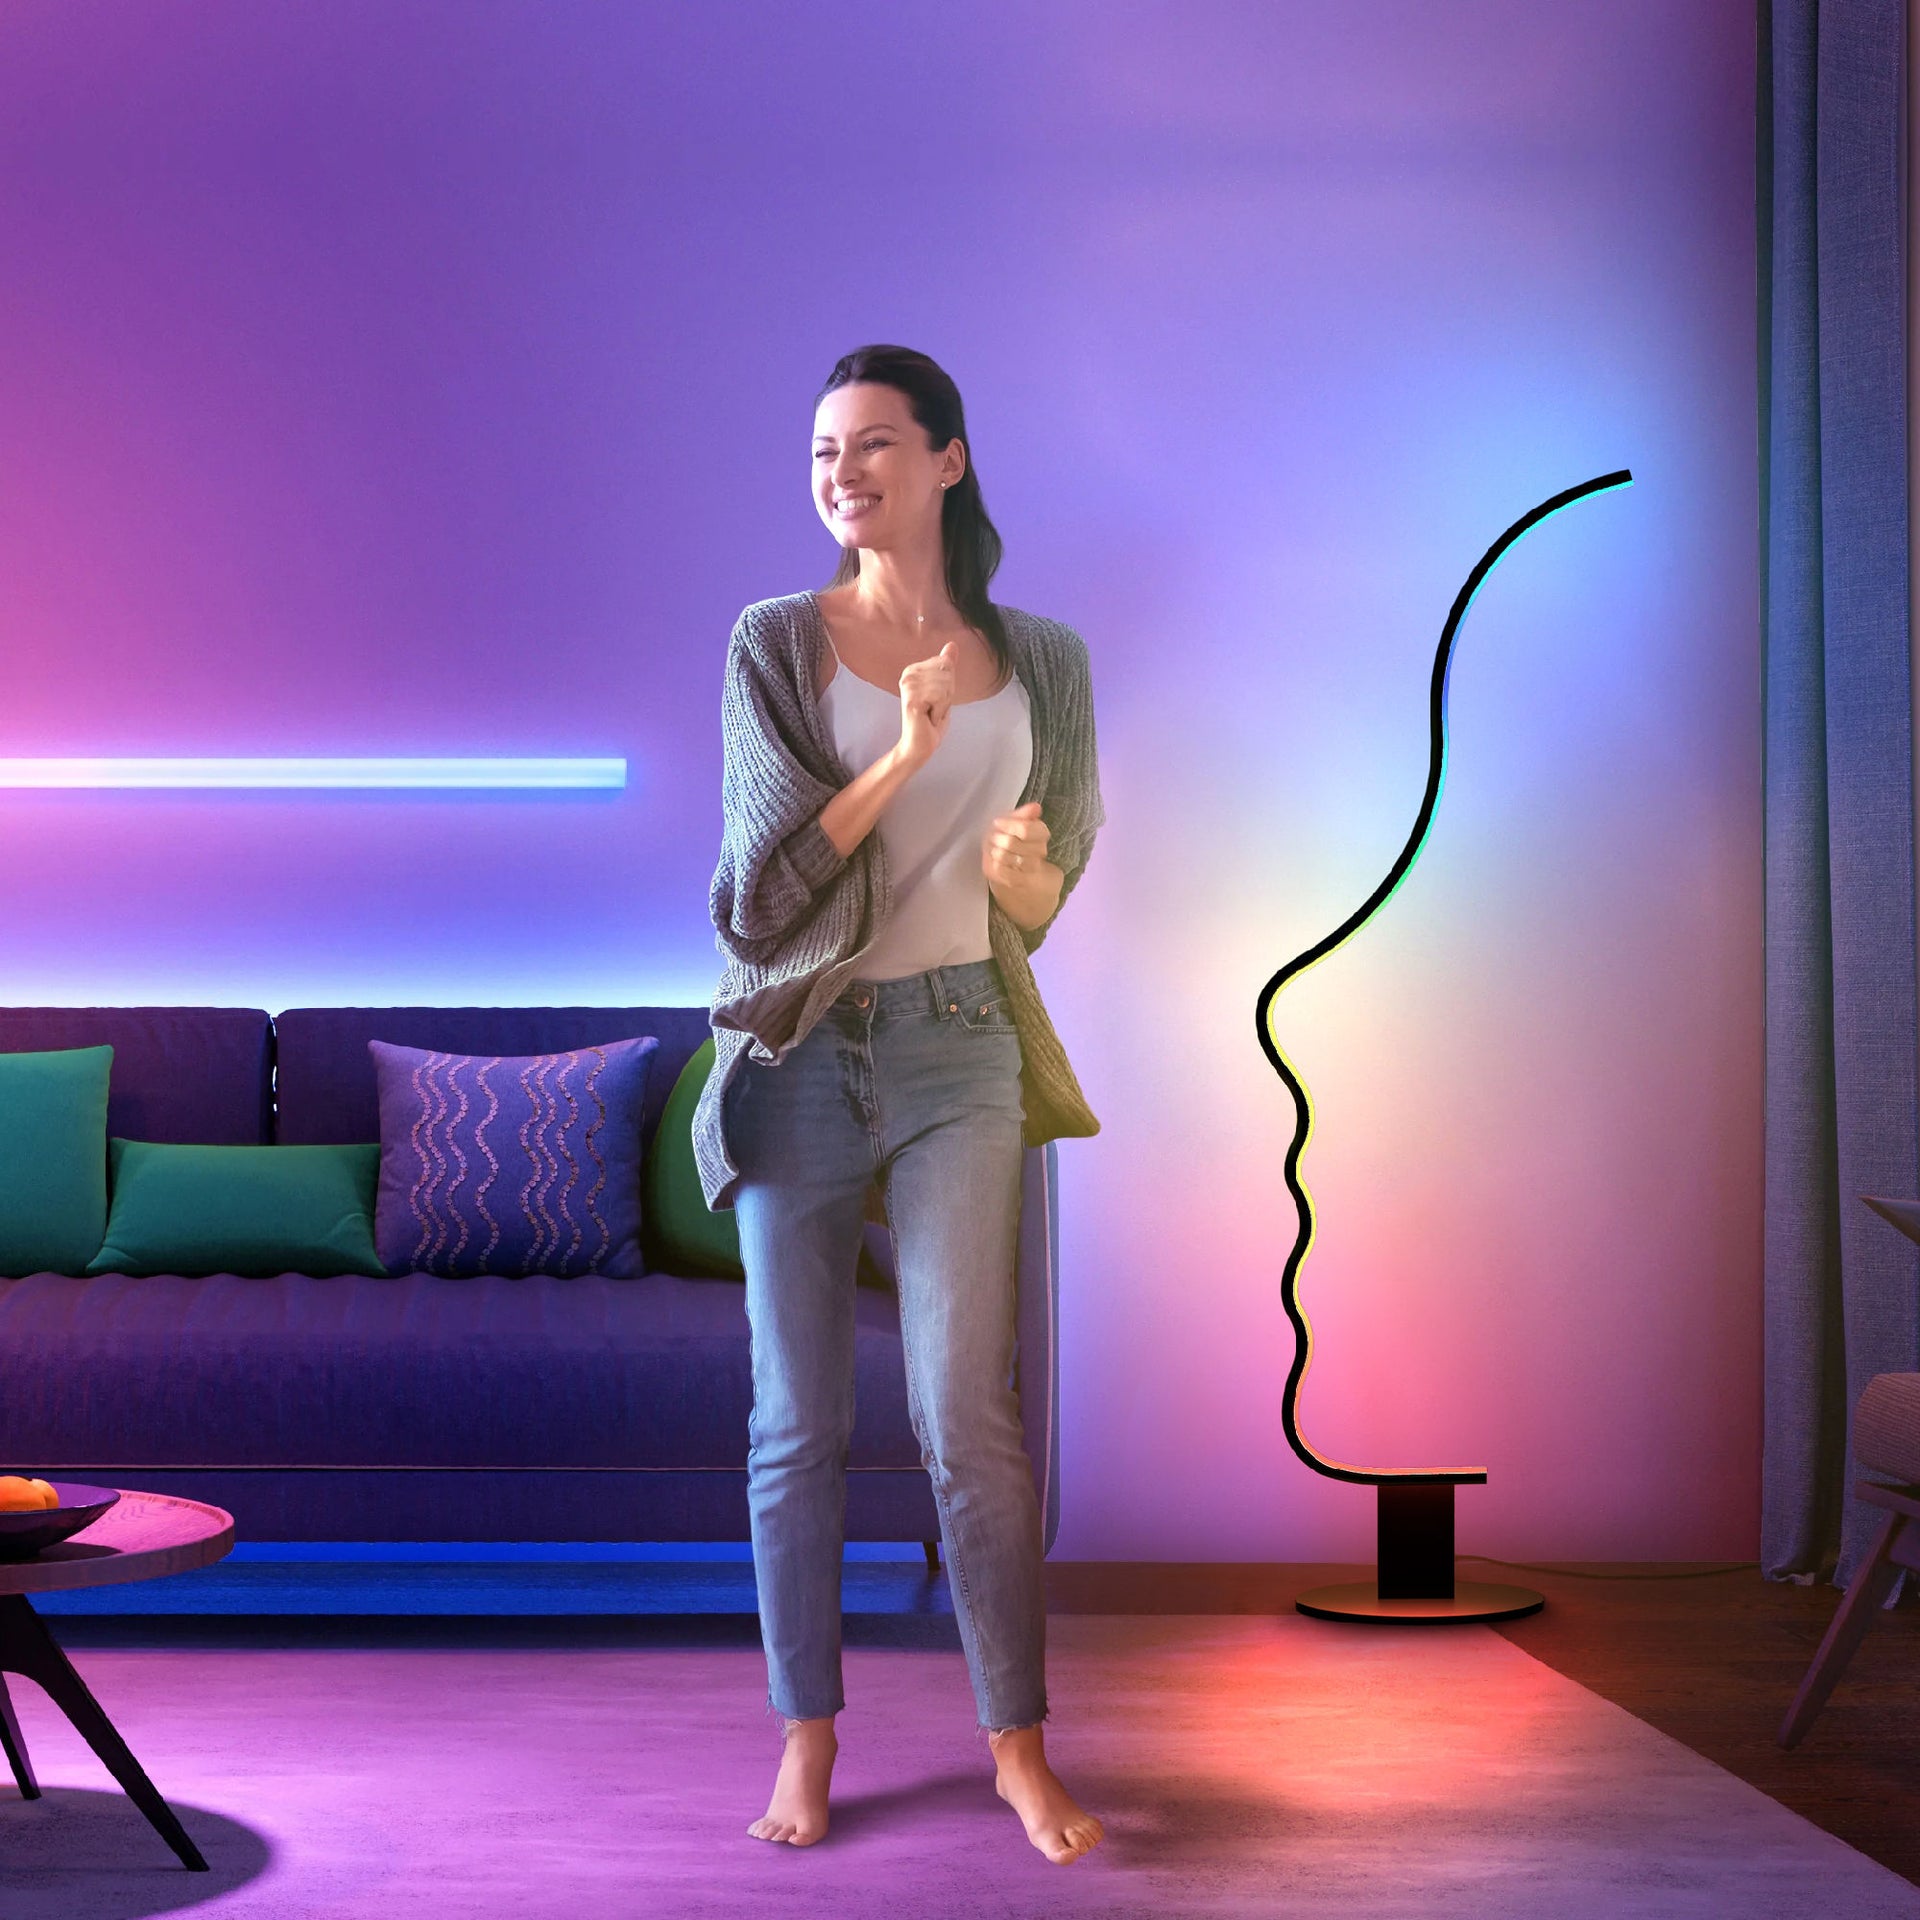 RGB Profile Face Floor Lamp RGBW Modern Face Floor Lamp for Bedroom Living Room;  Black Led Floor Lamp with Remote;  Cool Ambient Lighting Changing Curved Floor Lamp